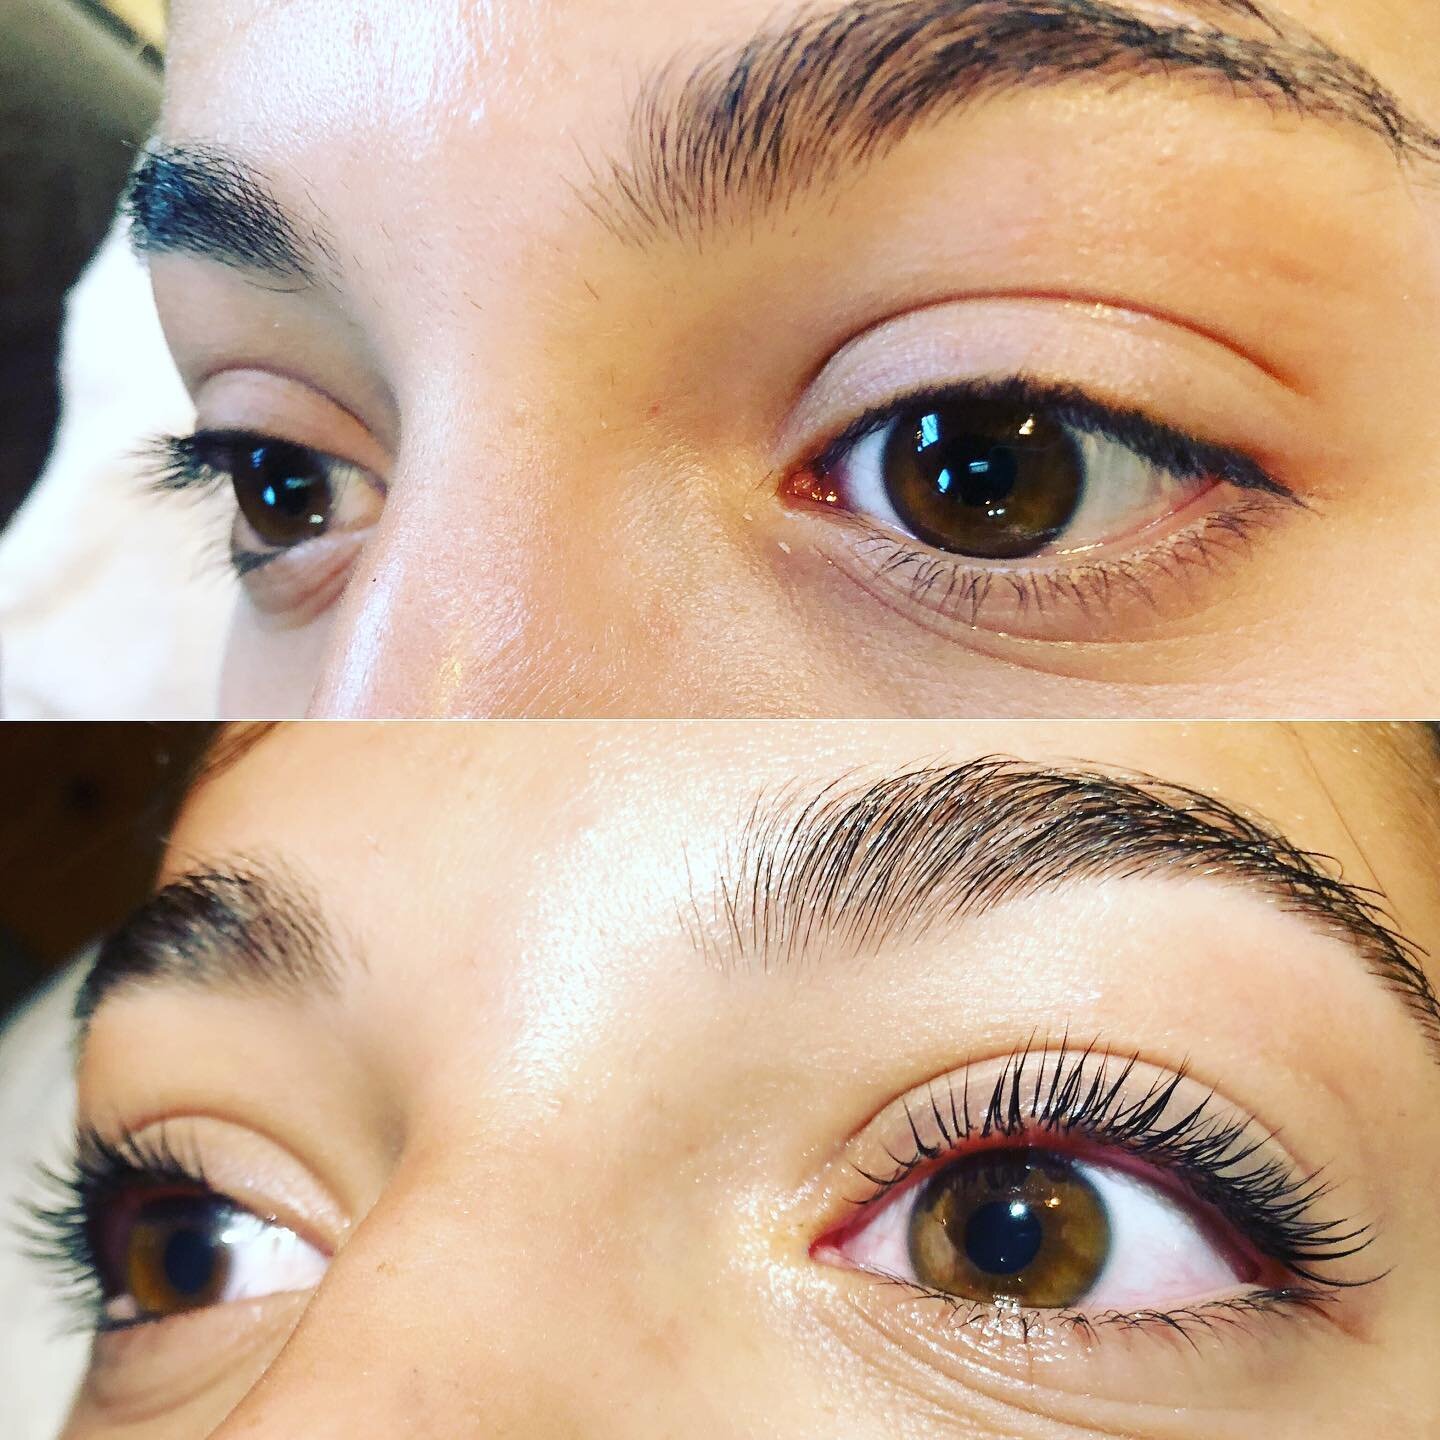 Lash lift/ tint combos and clean brows make a beautiful difference! Enhance your natural beauty by booking your appointment today! Openings in #bellefontepa August 28th! www.naviabeautystudio.com

#lashlift #lashtint #browtint #naturalbeauty #waxing 